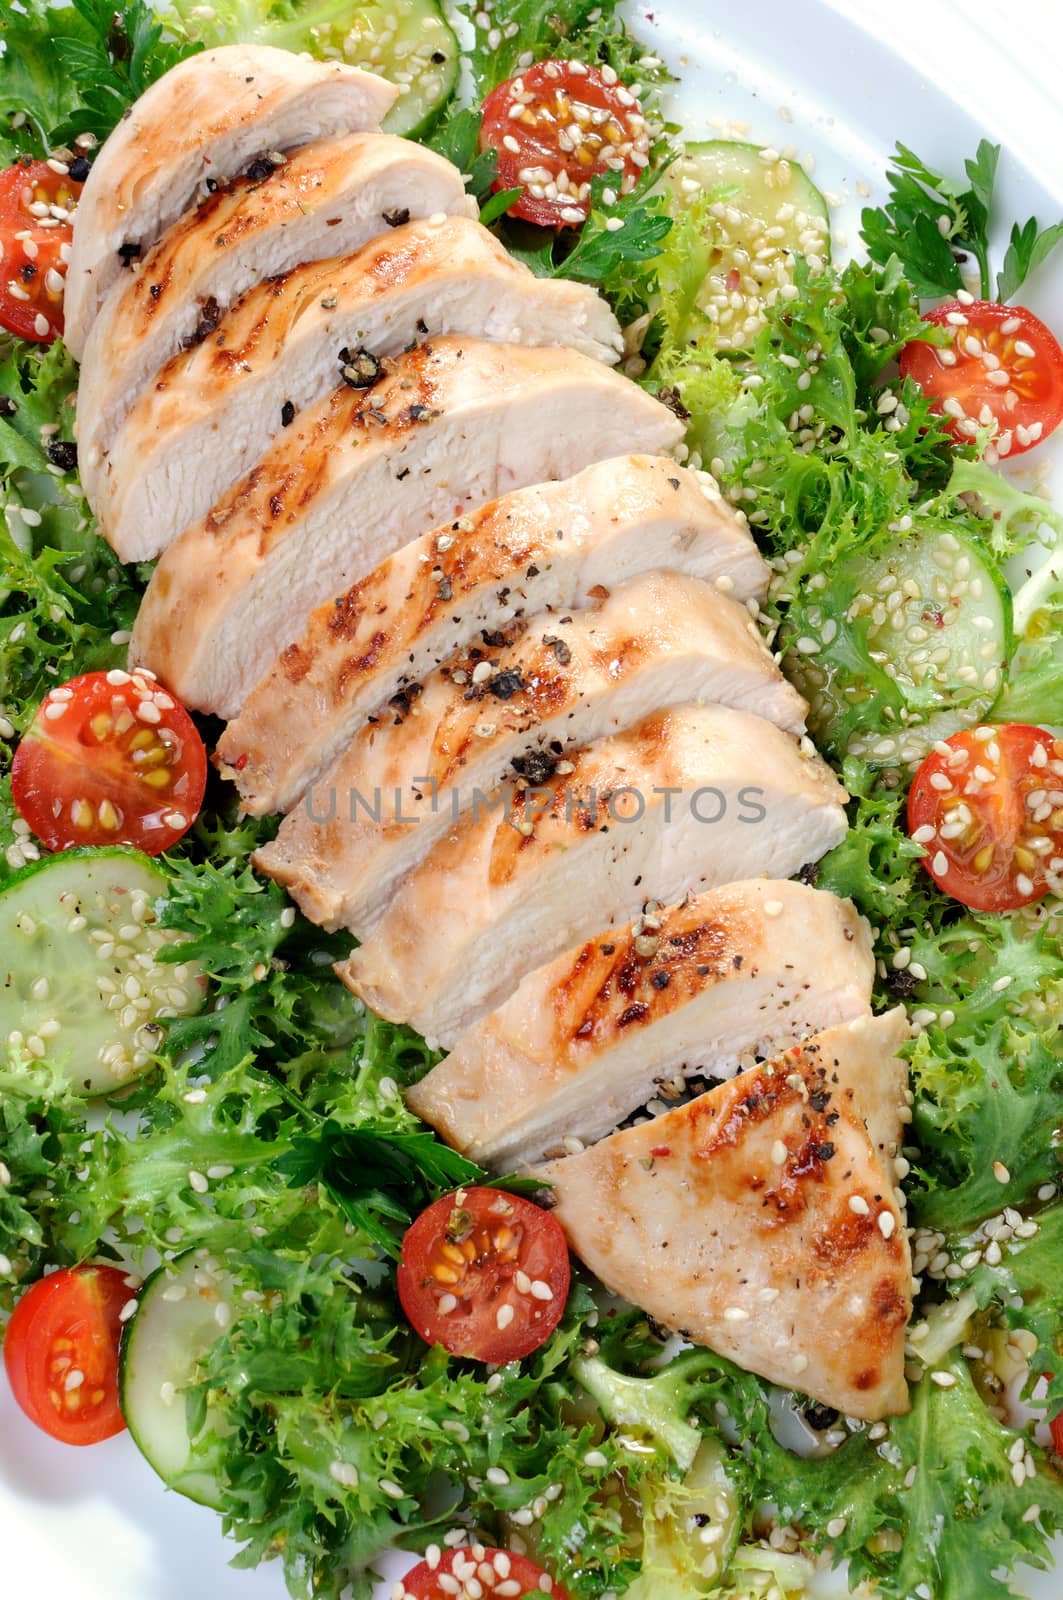 Cut into slices of grilled chicken breast with vegetable garnish